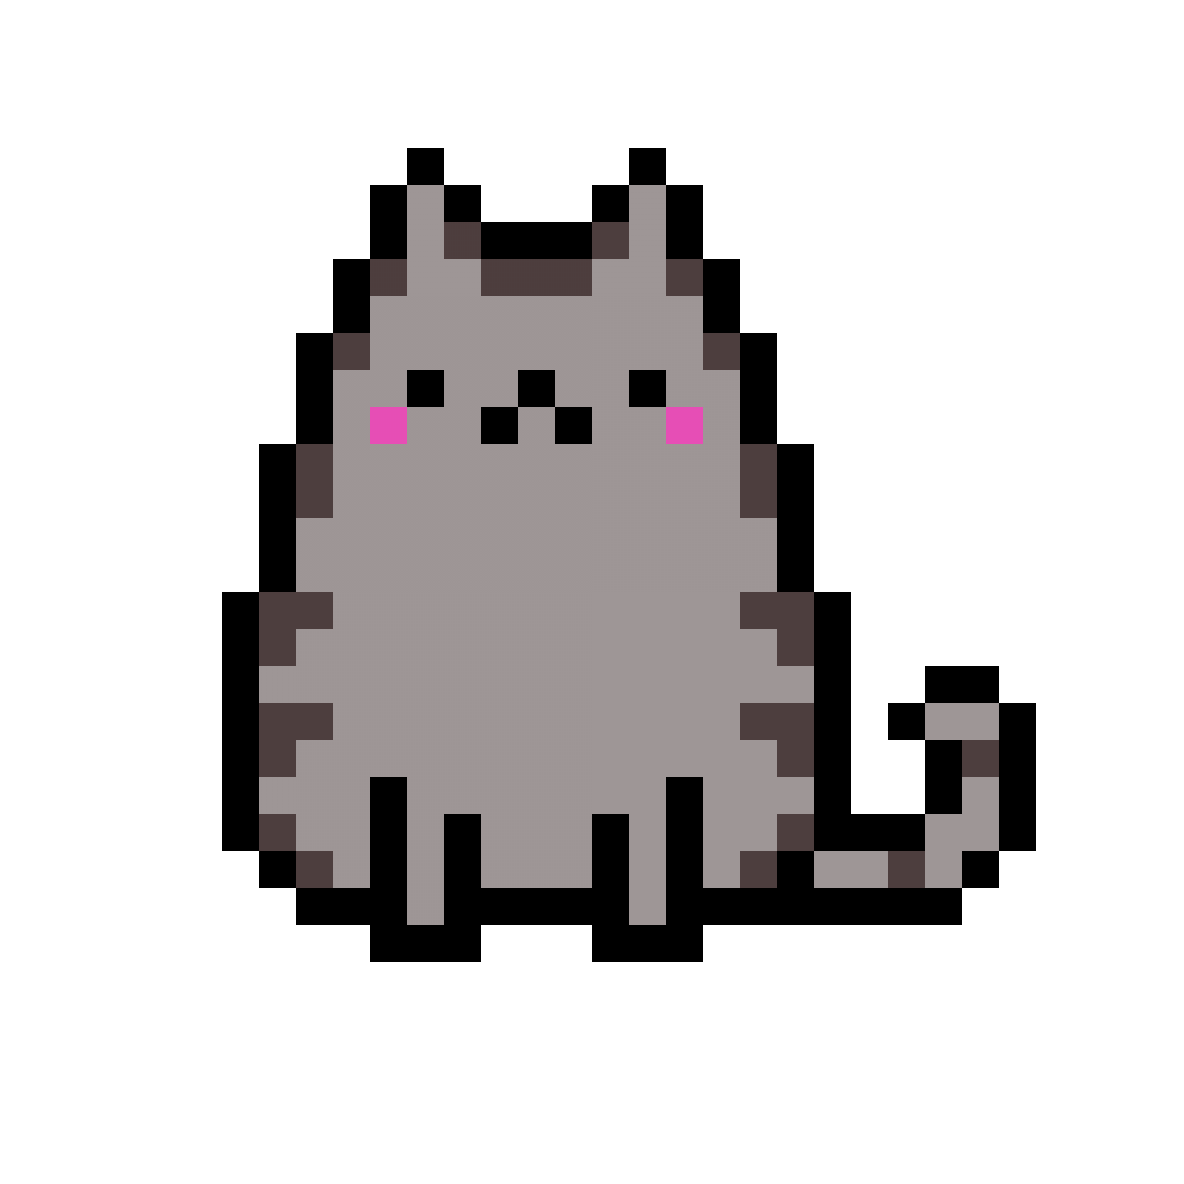 Square Art Pixel Rectangle Cat HD Image Free PNG PNG Image